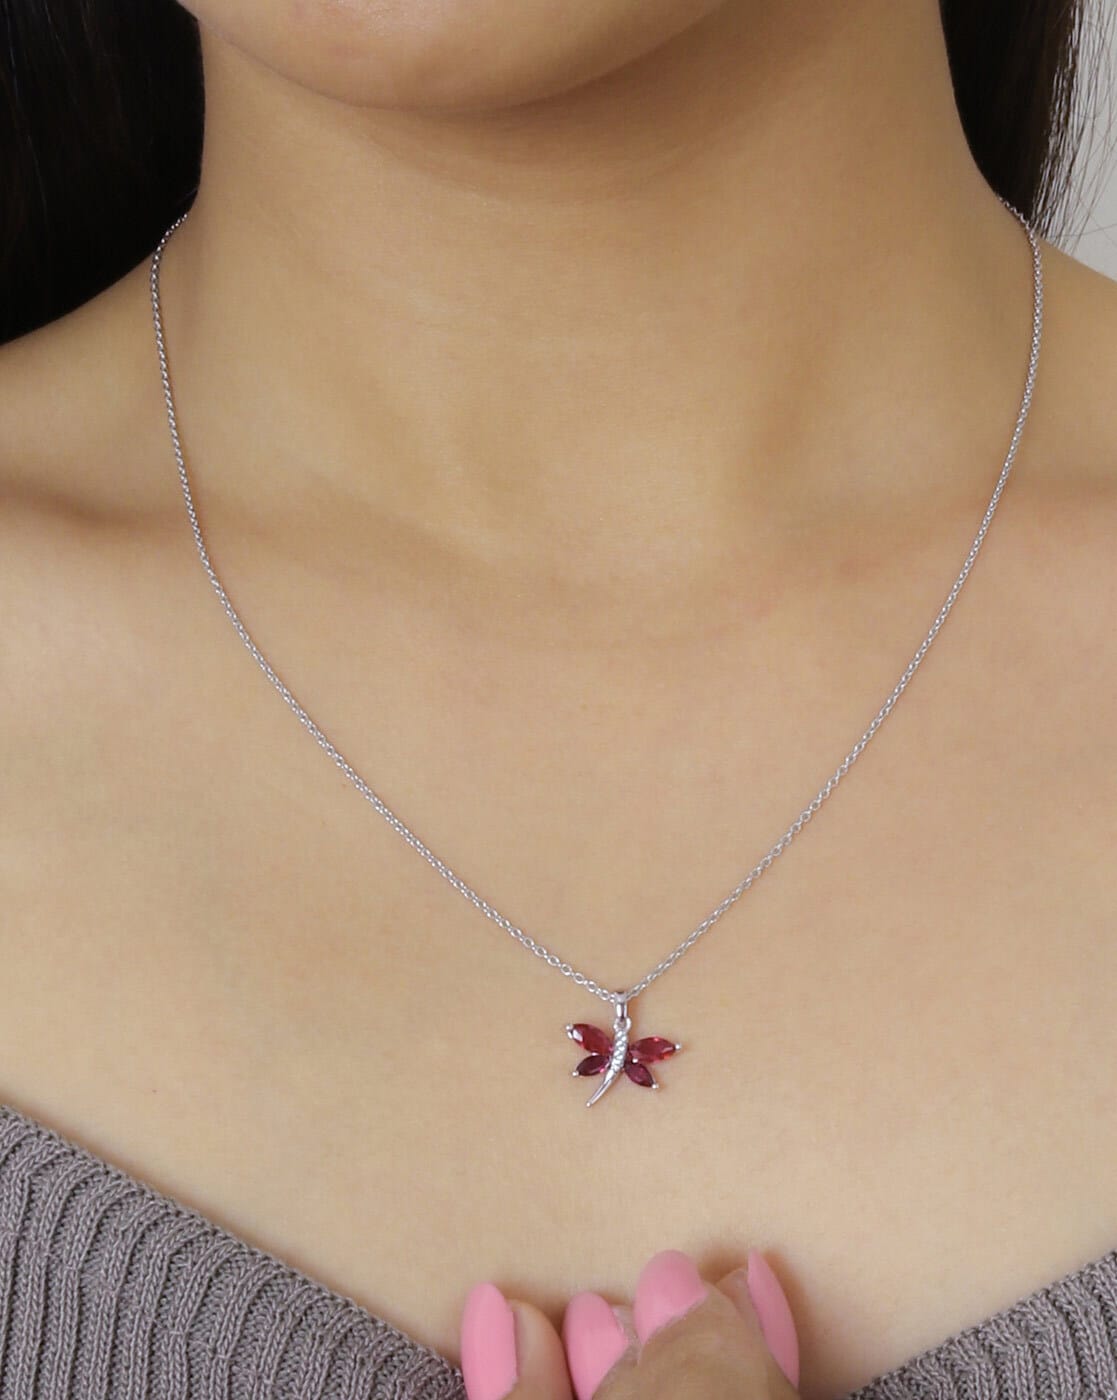 Buy Real Pink Tourmaline Necklace in 14k Real Gold | Chordia Jewels